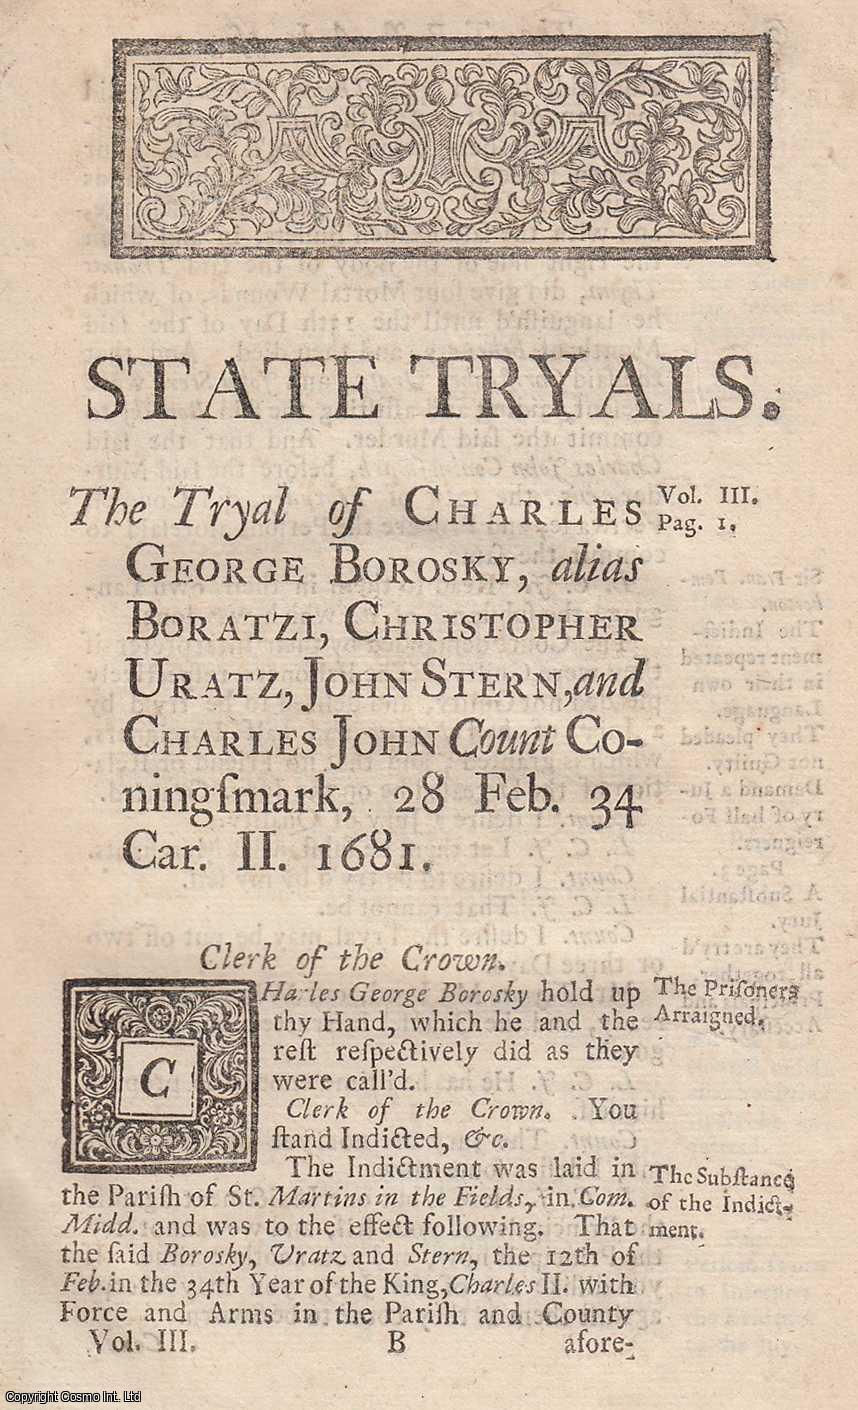 [Trial] - The Trial of George Borosky alias Boratzi, Christopher Uratz, and John Stern, and Charles-John Count Coningsmark, at the Old Bailey, for the Murder of Thomas Thynn, Esq, February 28, 1681. An original report from the collected Tryals for High Treason, and Other Crimes, 1720.